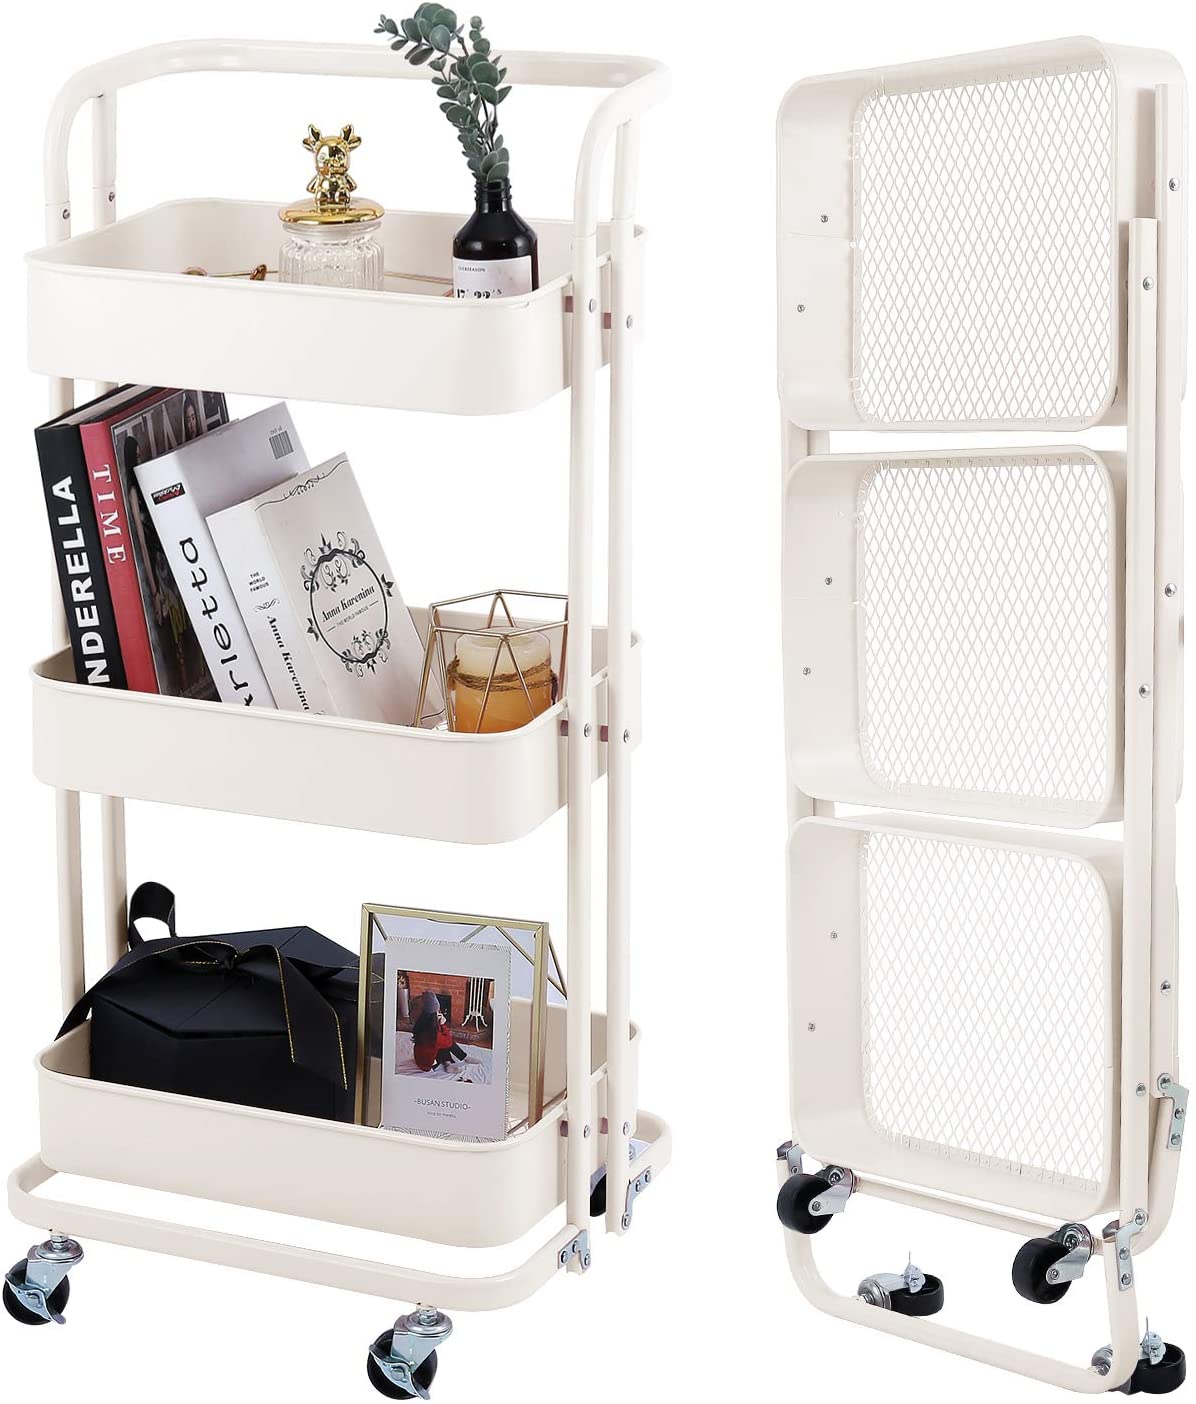 Photo 1 of 3Tier Foldable Utility Rolling Cart Multifunction Storage Shelves with Handle and Wheels for Office Kitchen Bathroom OrganizationCream White